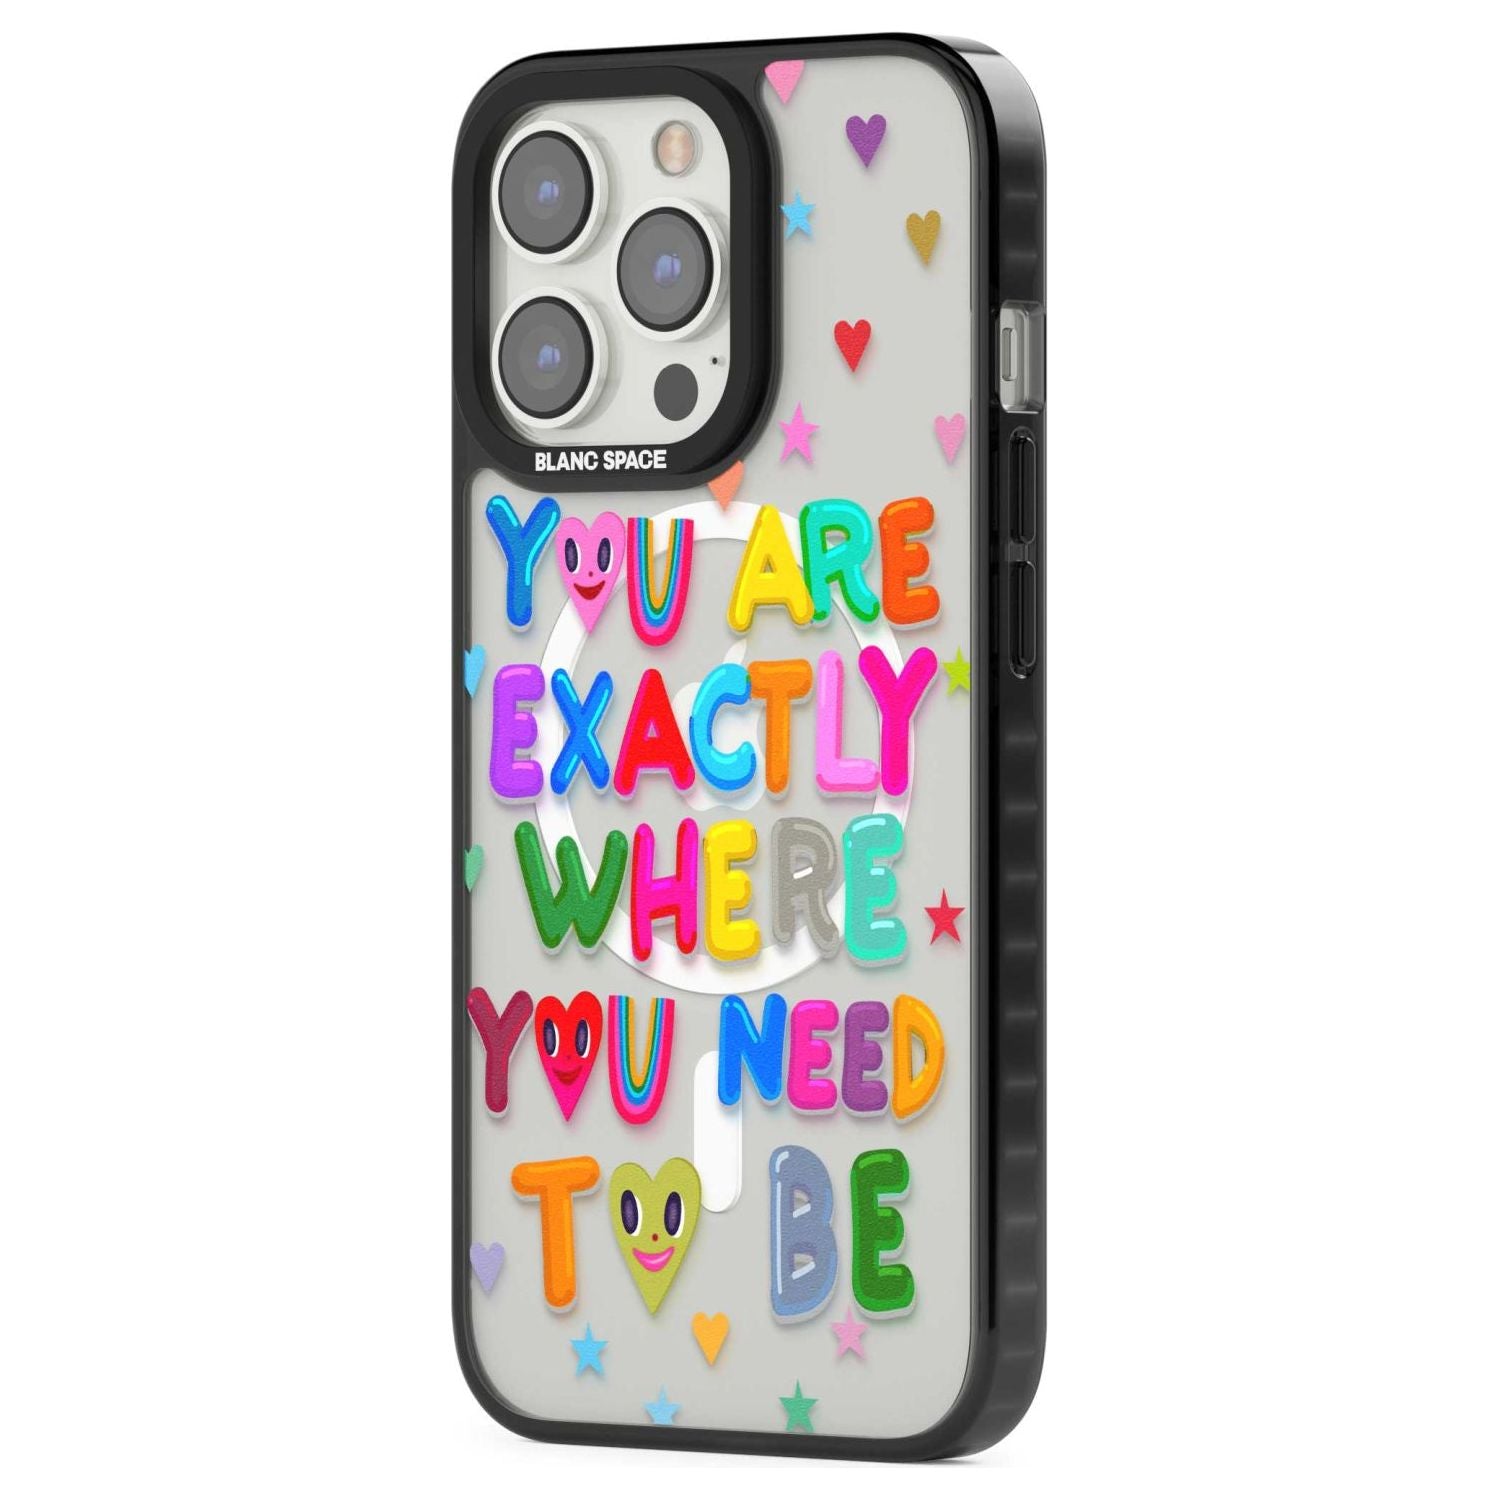 Exactly Where You Need To be Phone Case iPhone 15 Pro Max / Black Impact Case,iPhone 15 Plus / Black Impact Case,iPhone 15 Pro / Black Impact Case,iPhone 15 / Black Impact Case,iPhone 15 Pro Max / Impact Case,iPhone 15 Plus / Impact Case,iPhone 15 Pro / Impact Case,iPhon